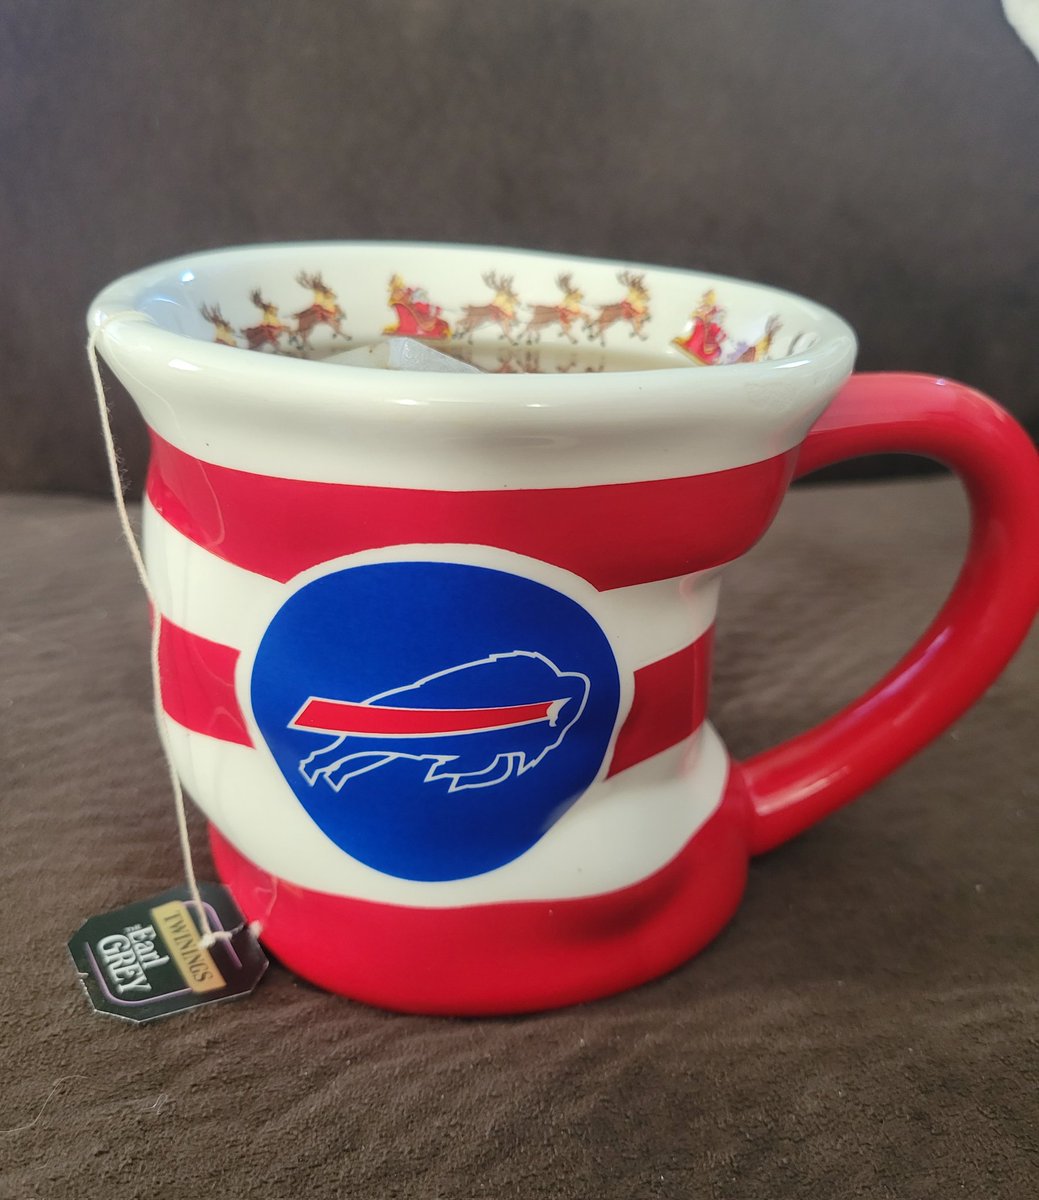 Lets Go Buffalo!! Clip those wings... only reindeer fly!! 
#ChristmasMug #GoBills ❤️💙